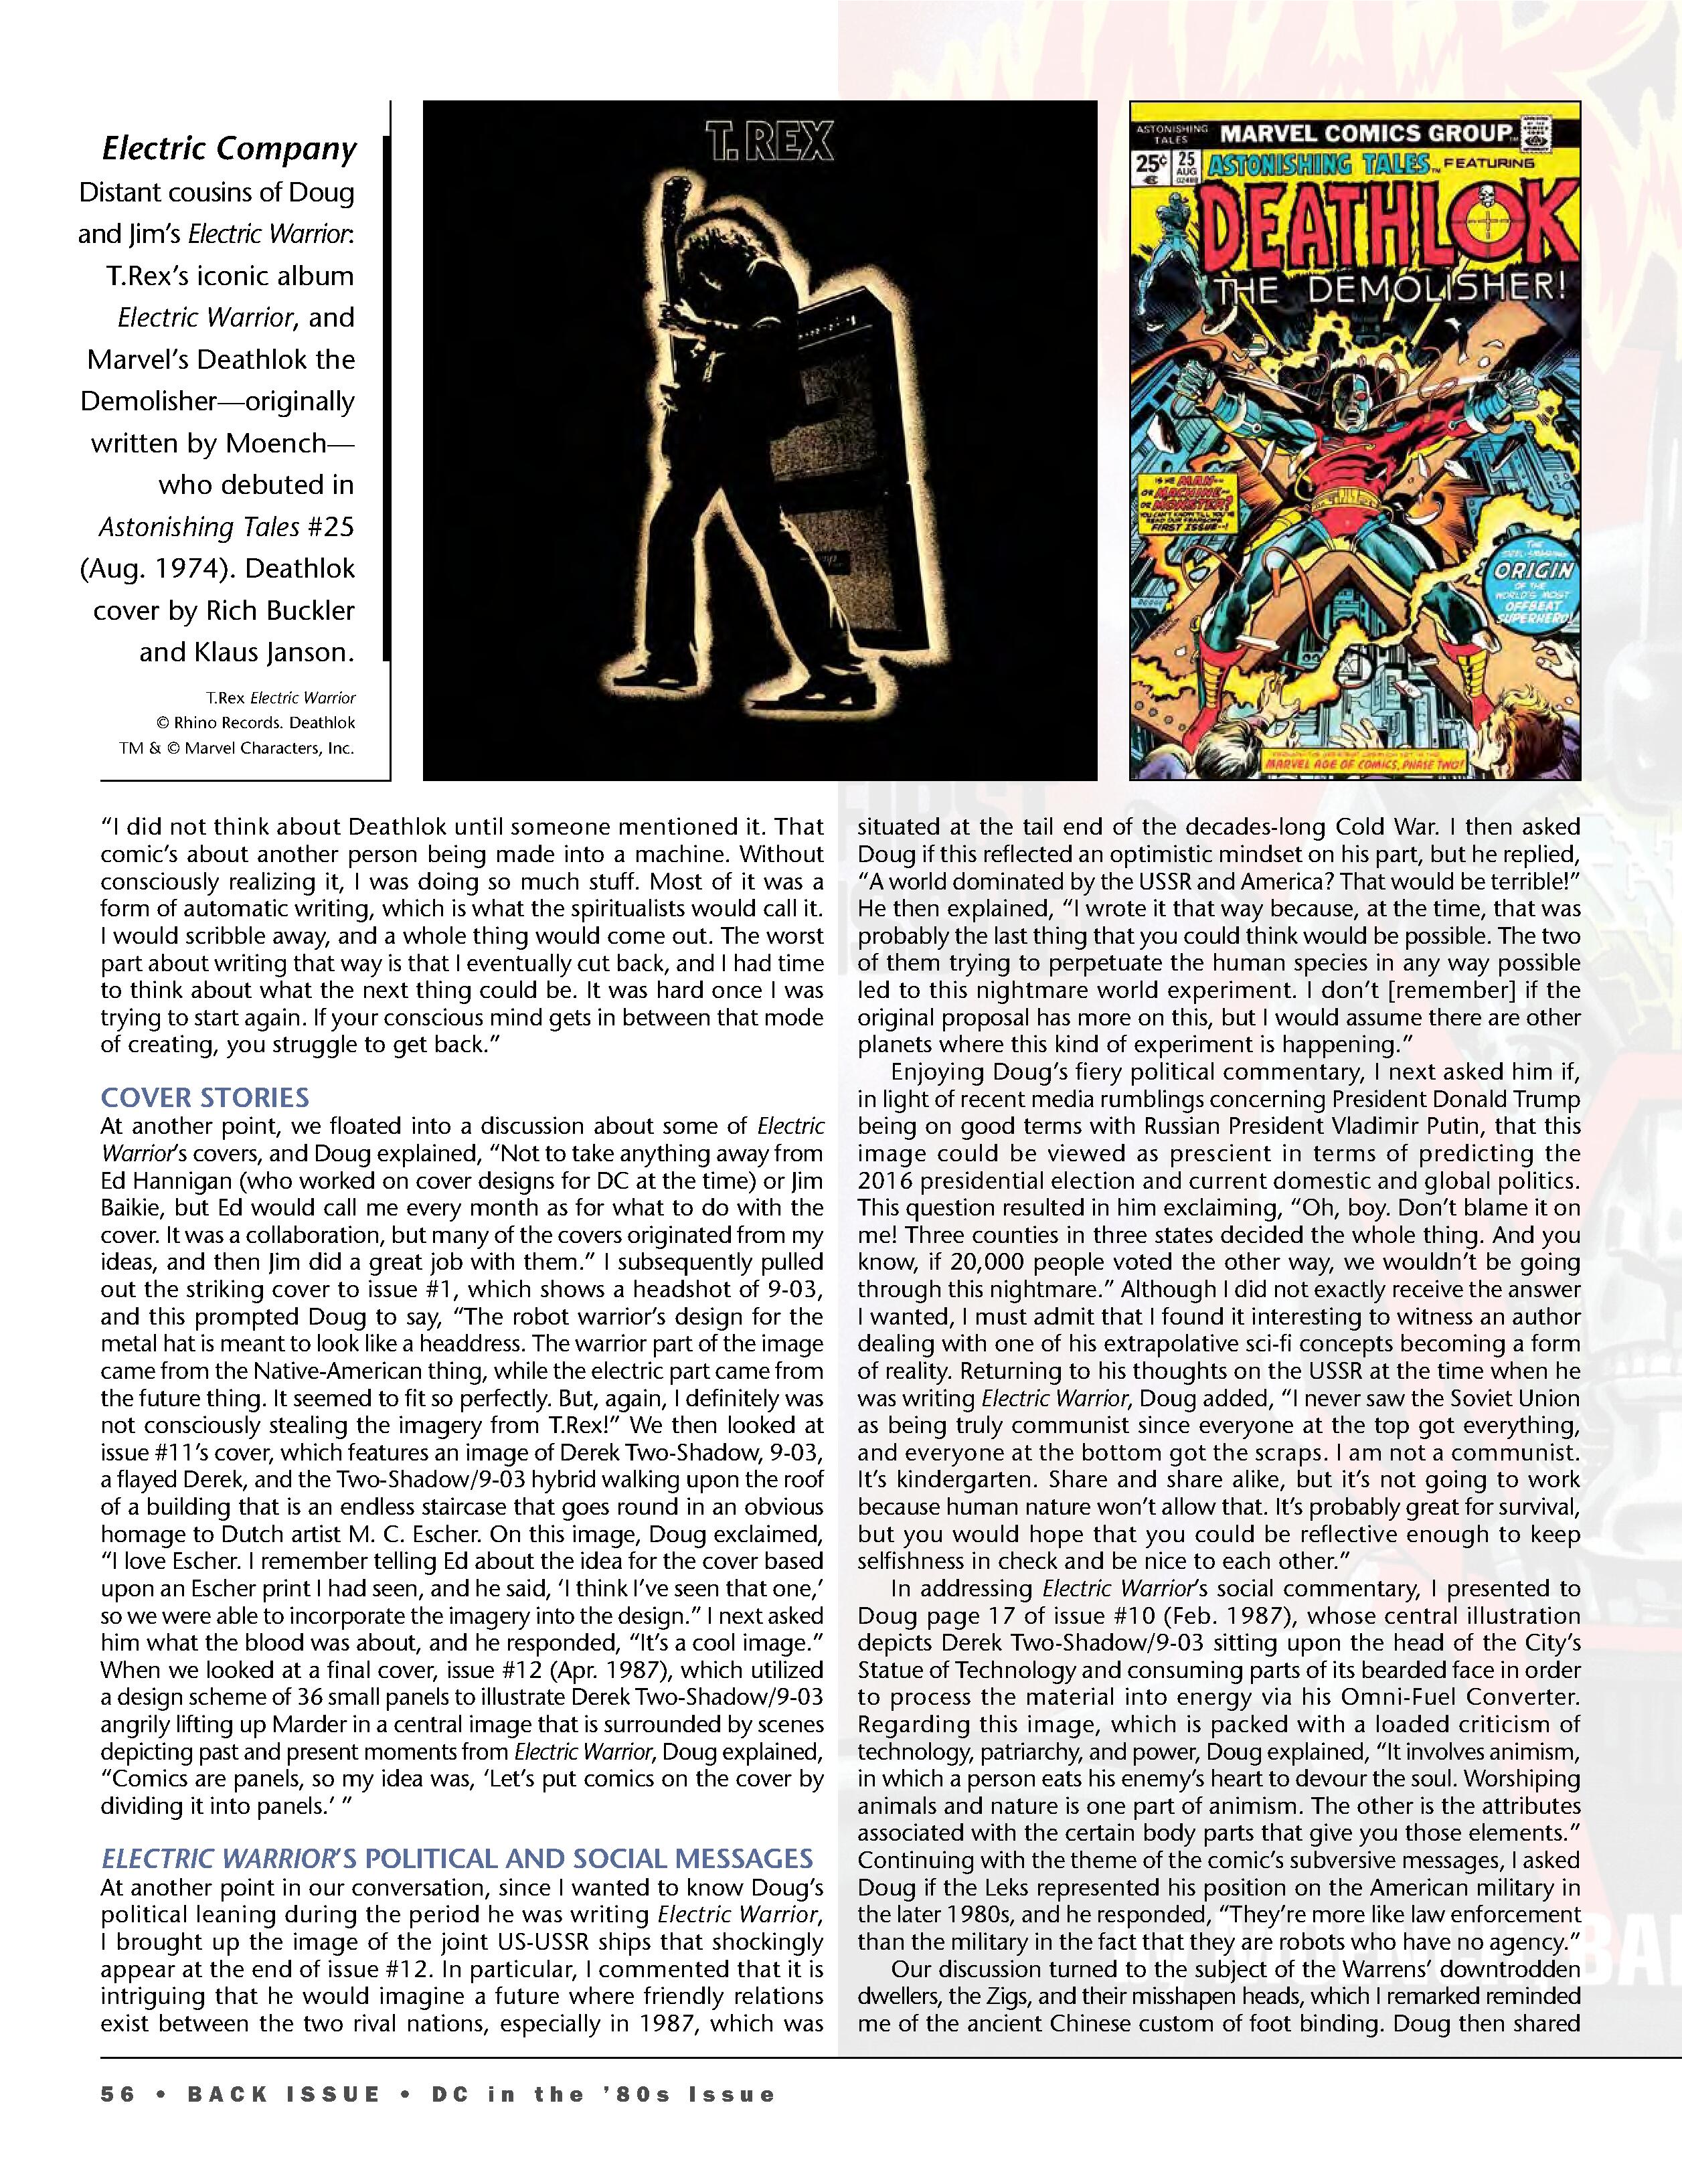 Read online Back Issue comic -  Issue #98 - 58